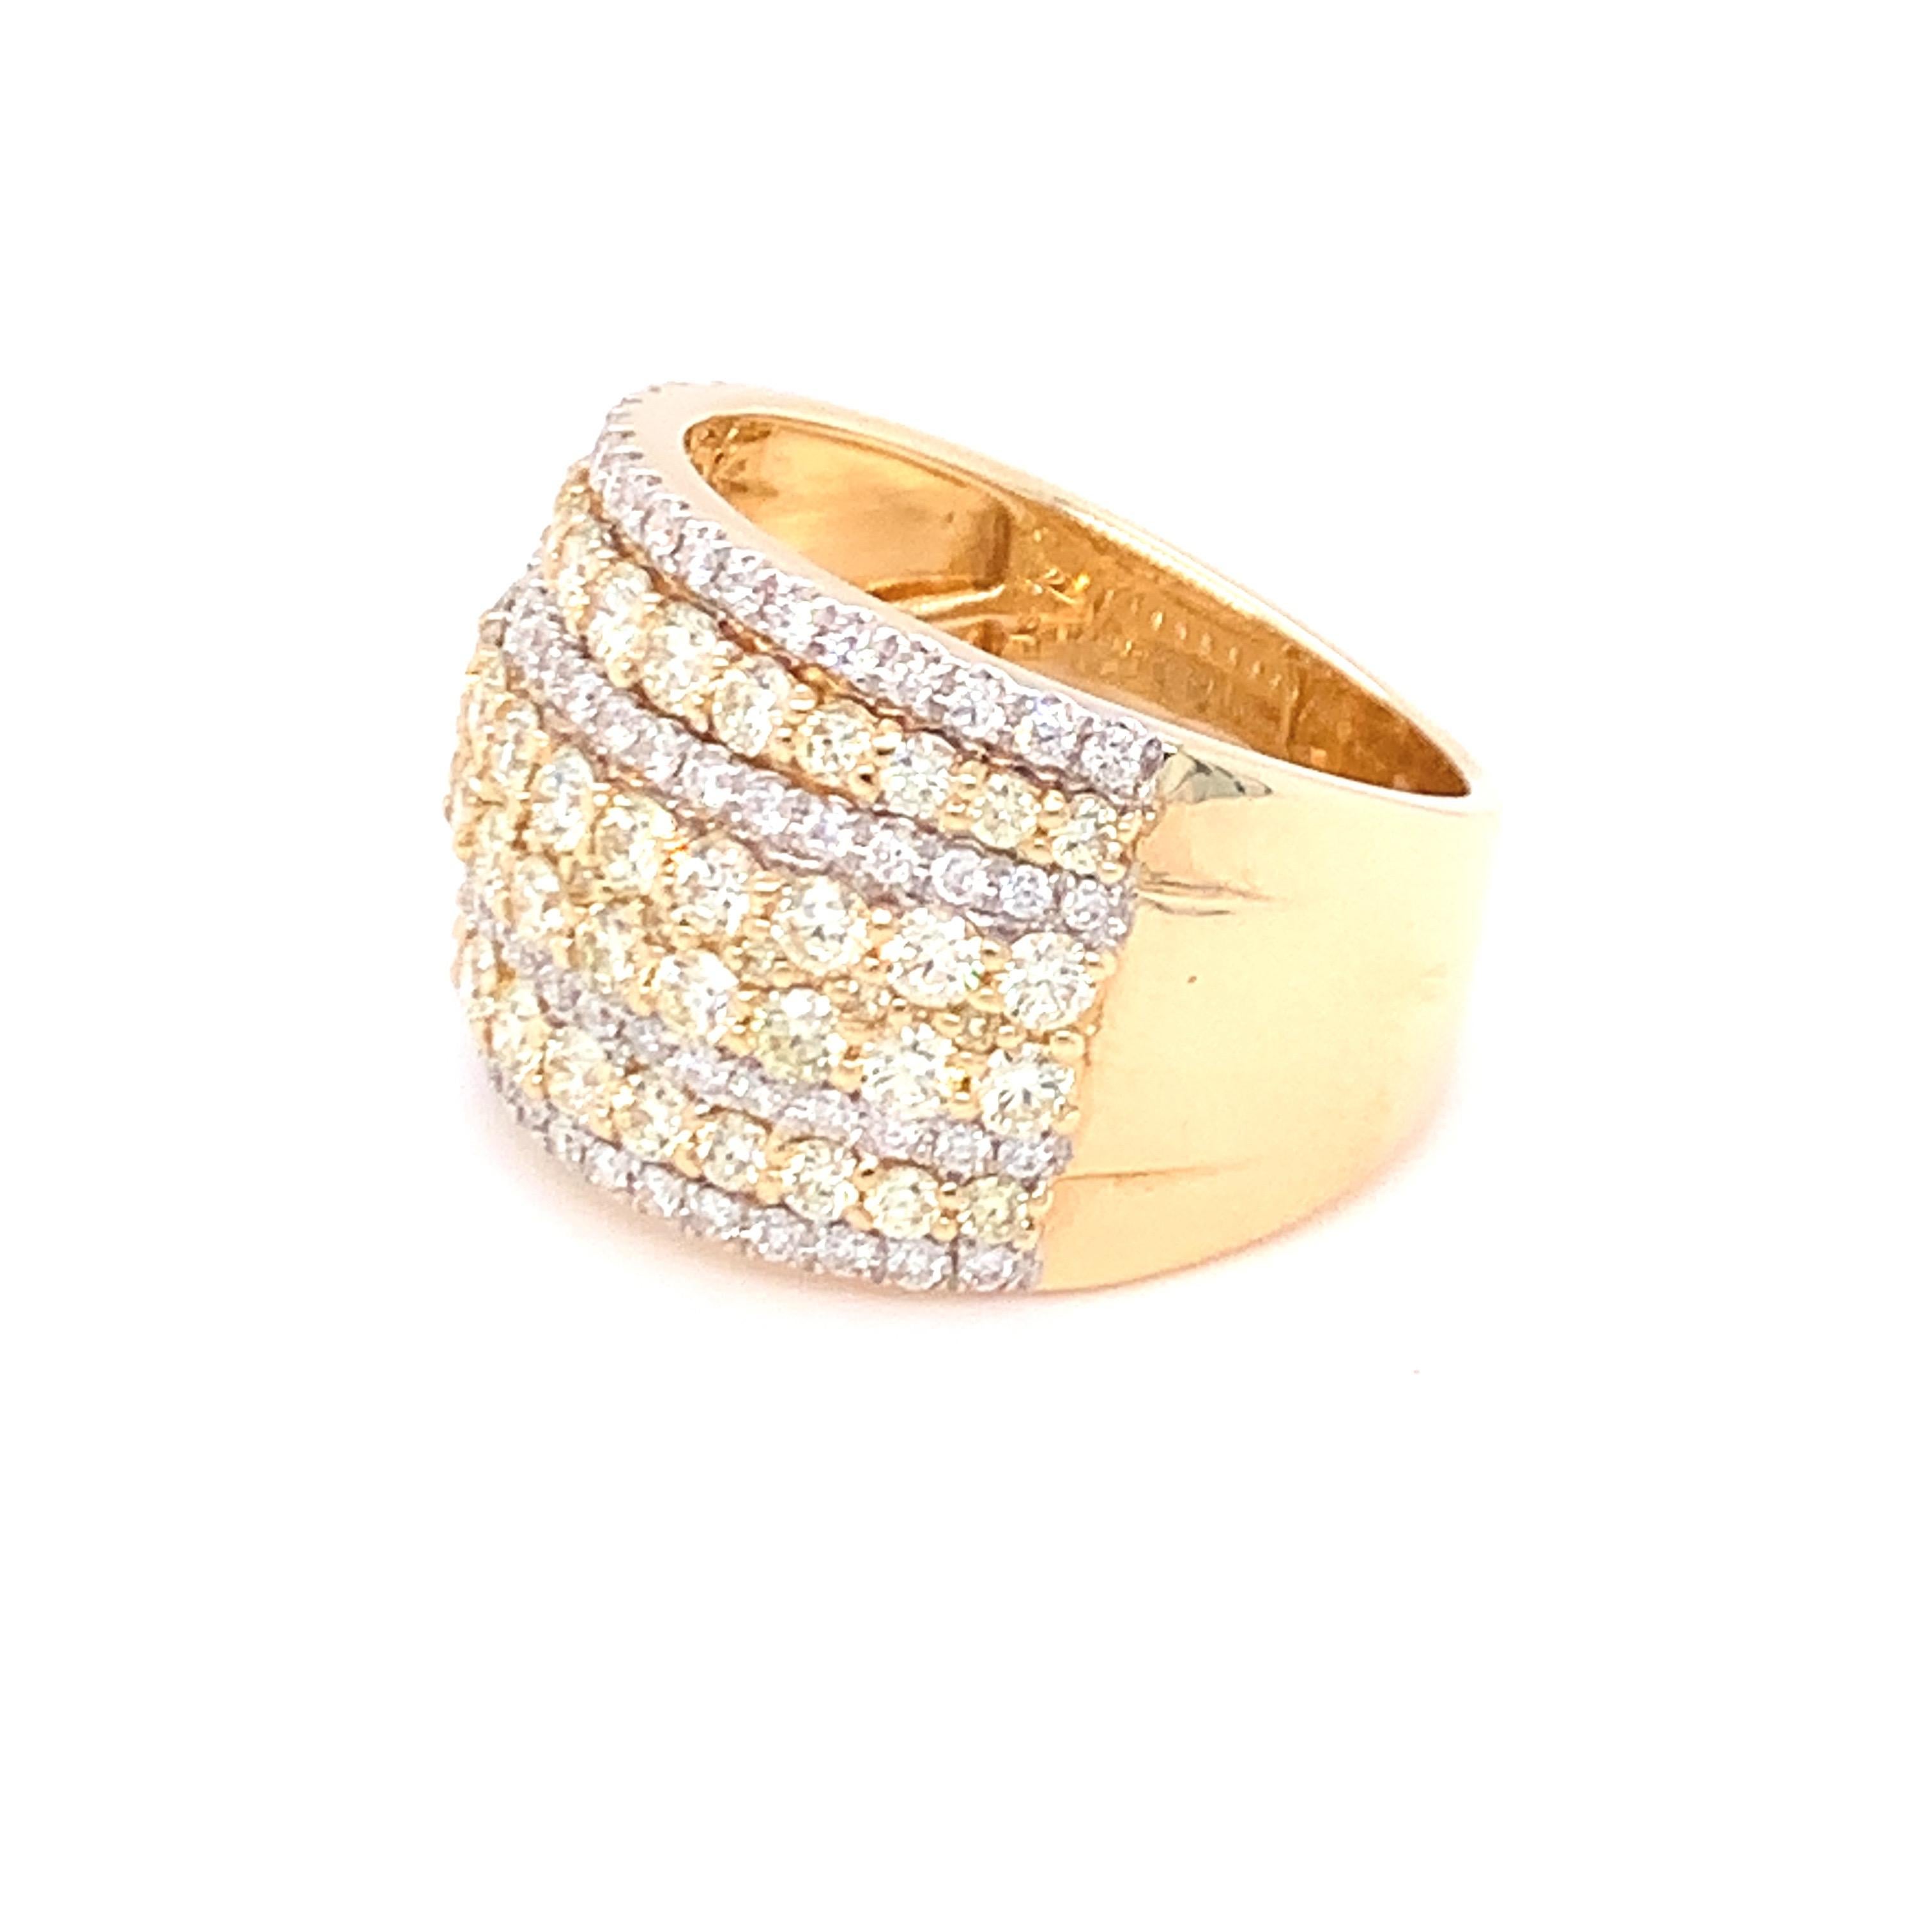 2.08 Carat Diamond Band Ring in 14k Yellow Gold For Sale 5